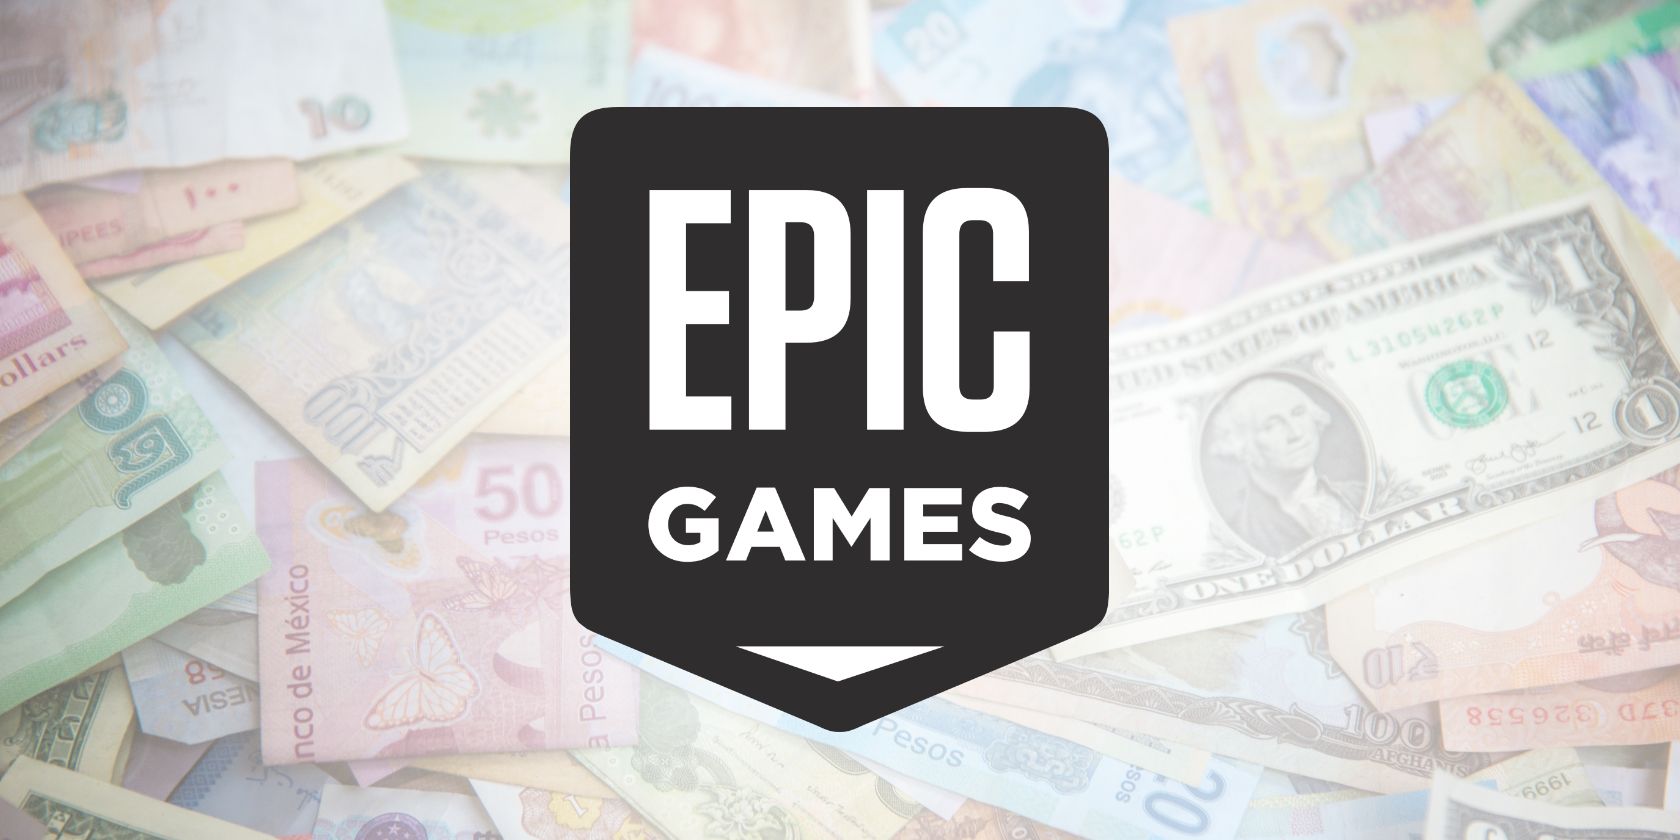 How to refund an Epic Games Store purchase - Billing Support